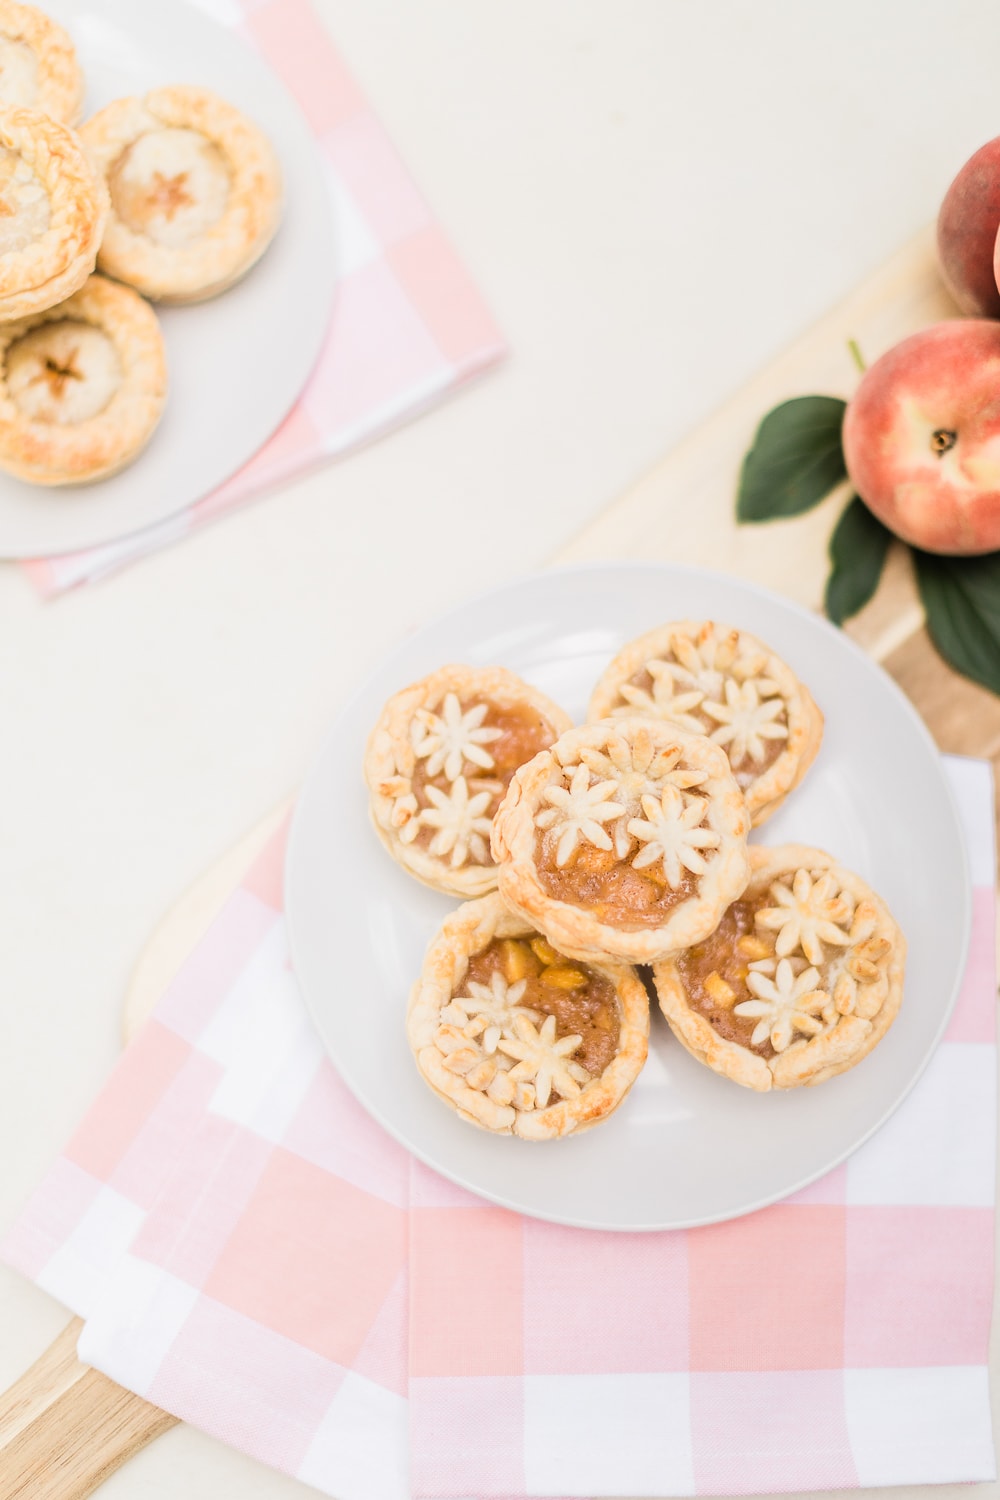 Mini peach pies baked by southern lifestyle blogger Stephanie Ziajka on Diary of a Debutante